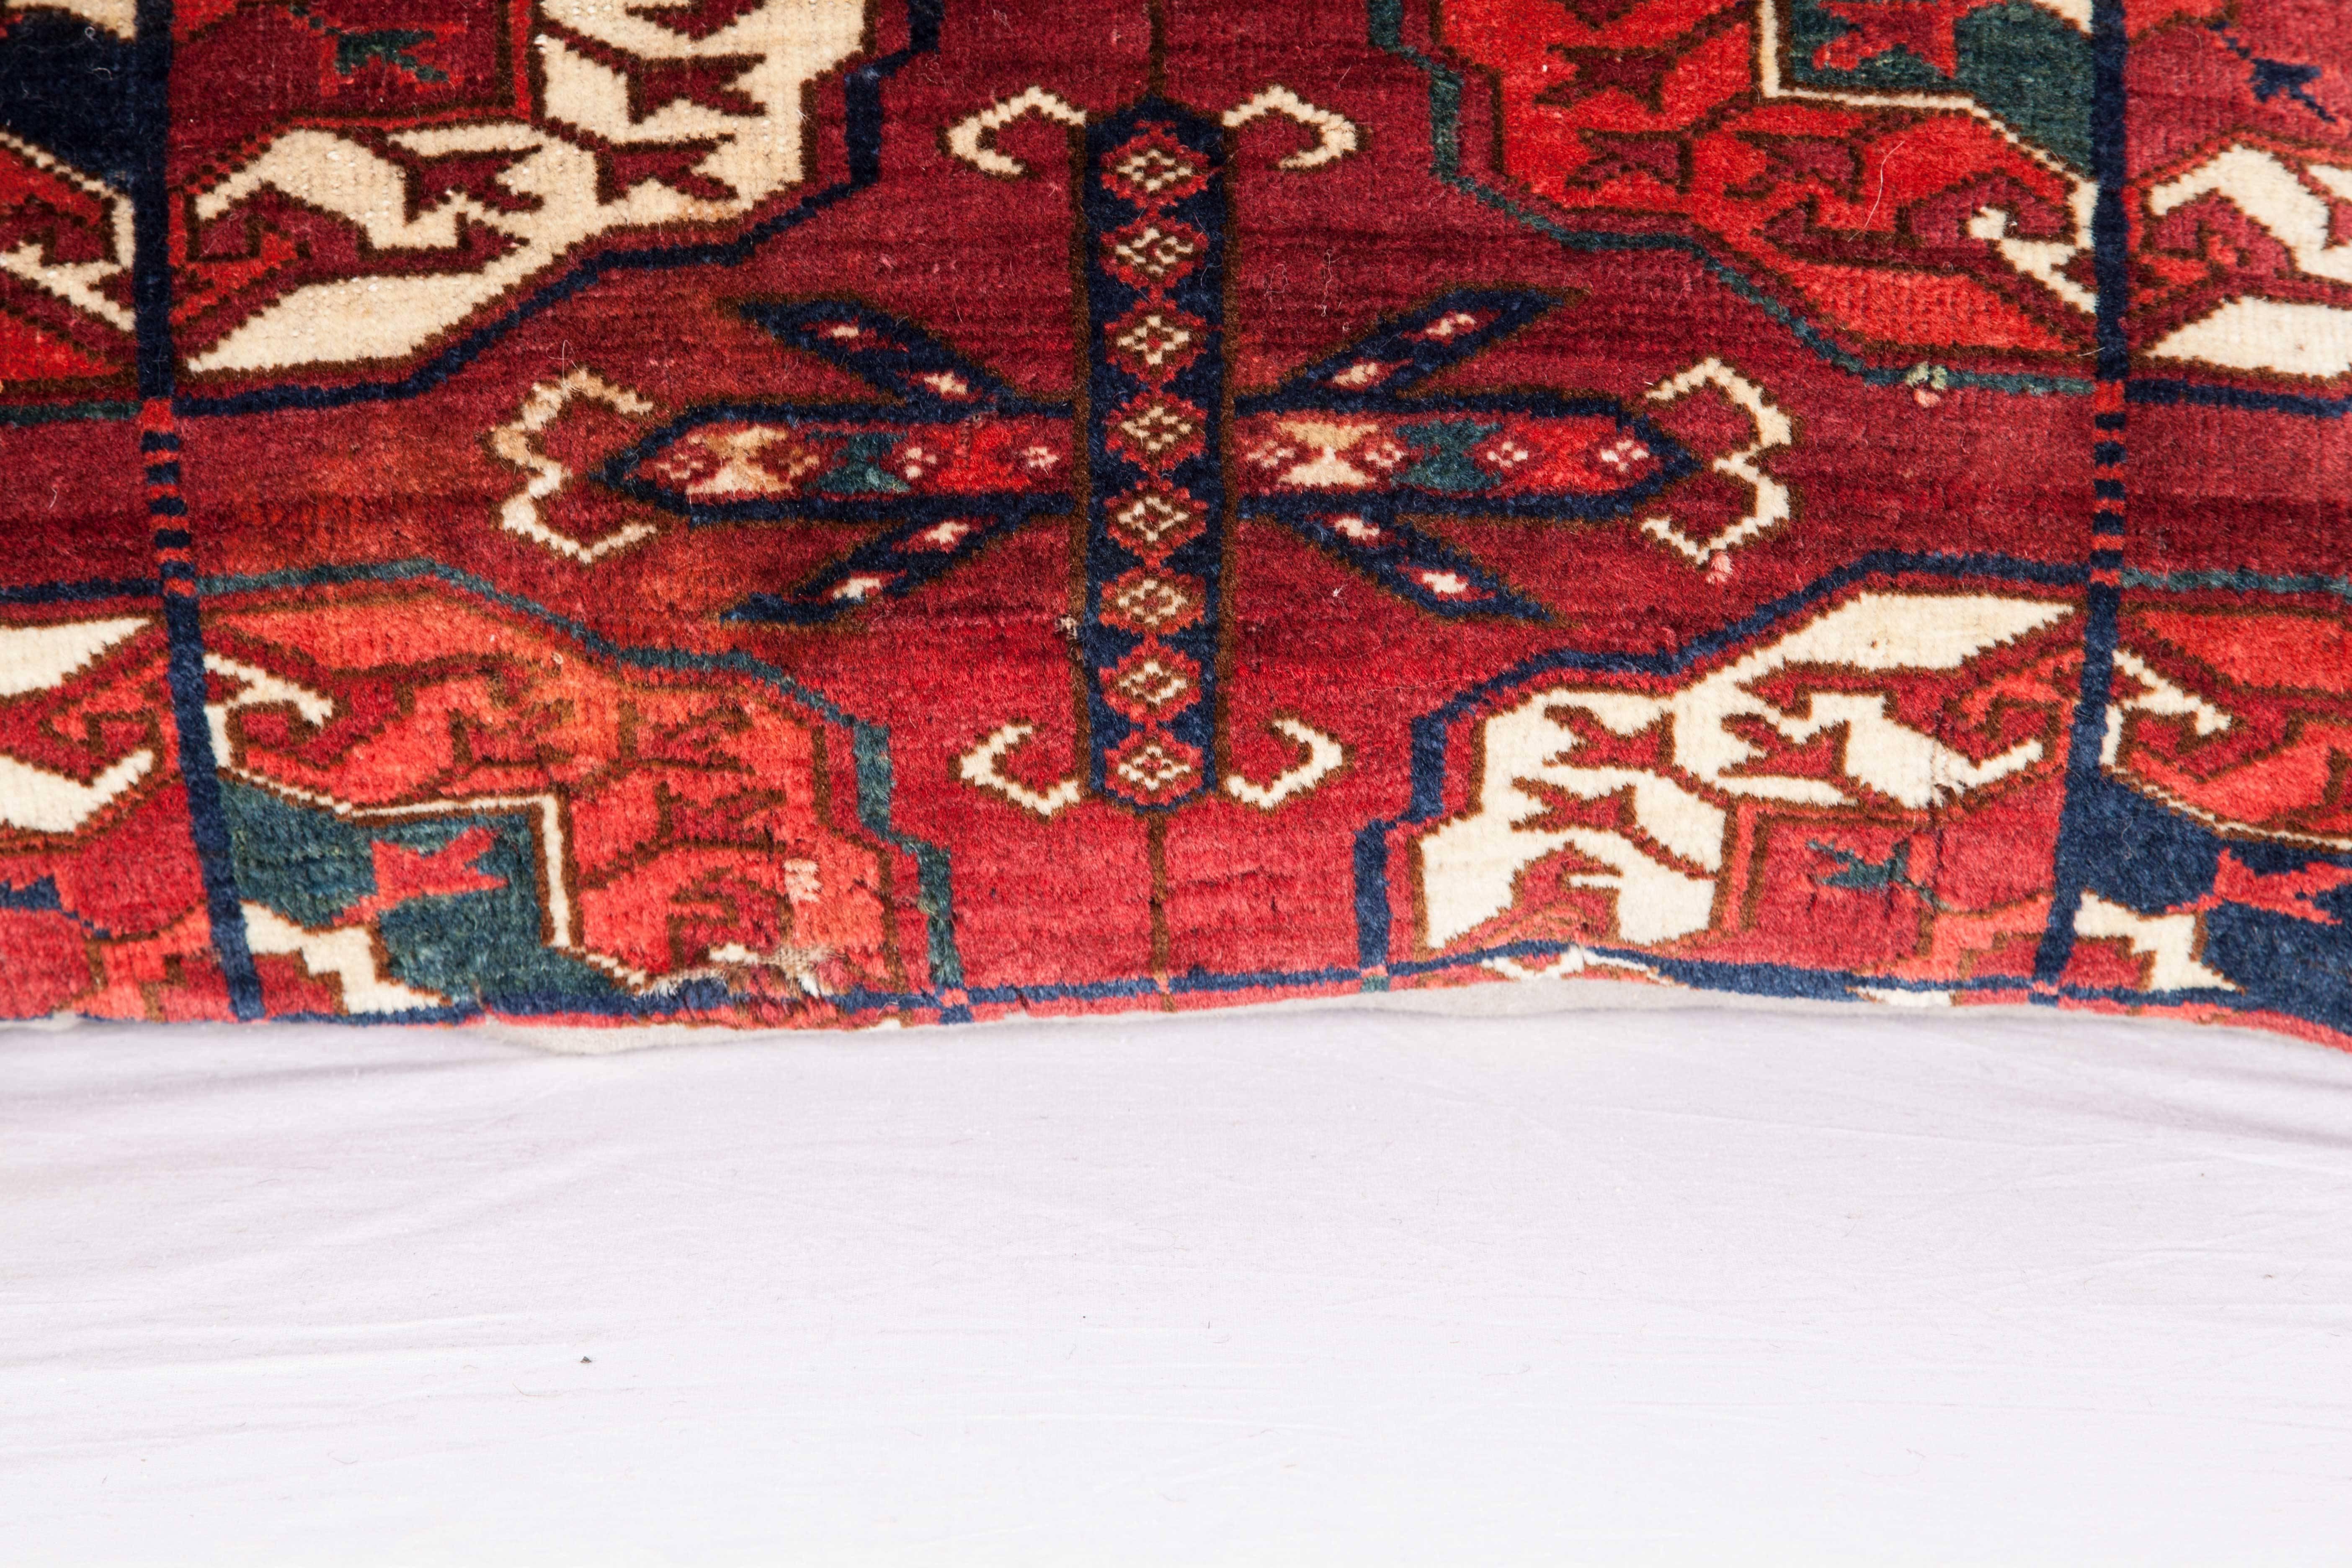 Hand-Woven Antique Pillow with Velvet like Texture Made Out of a Turkmen Rug